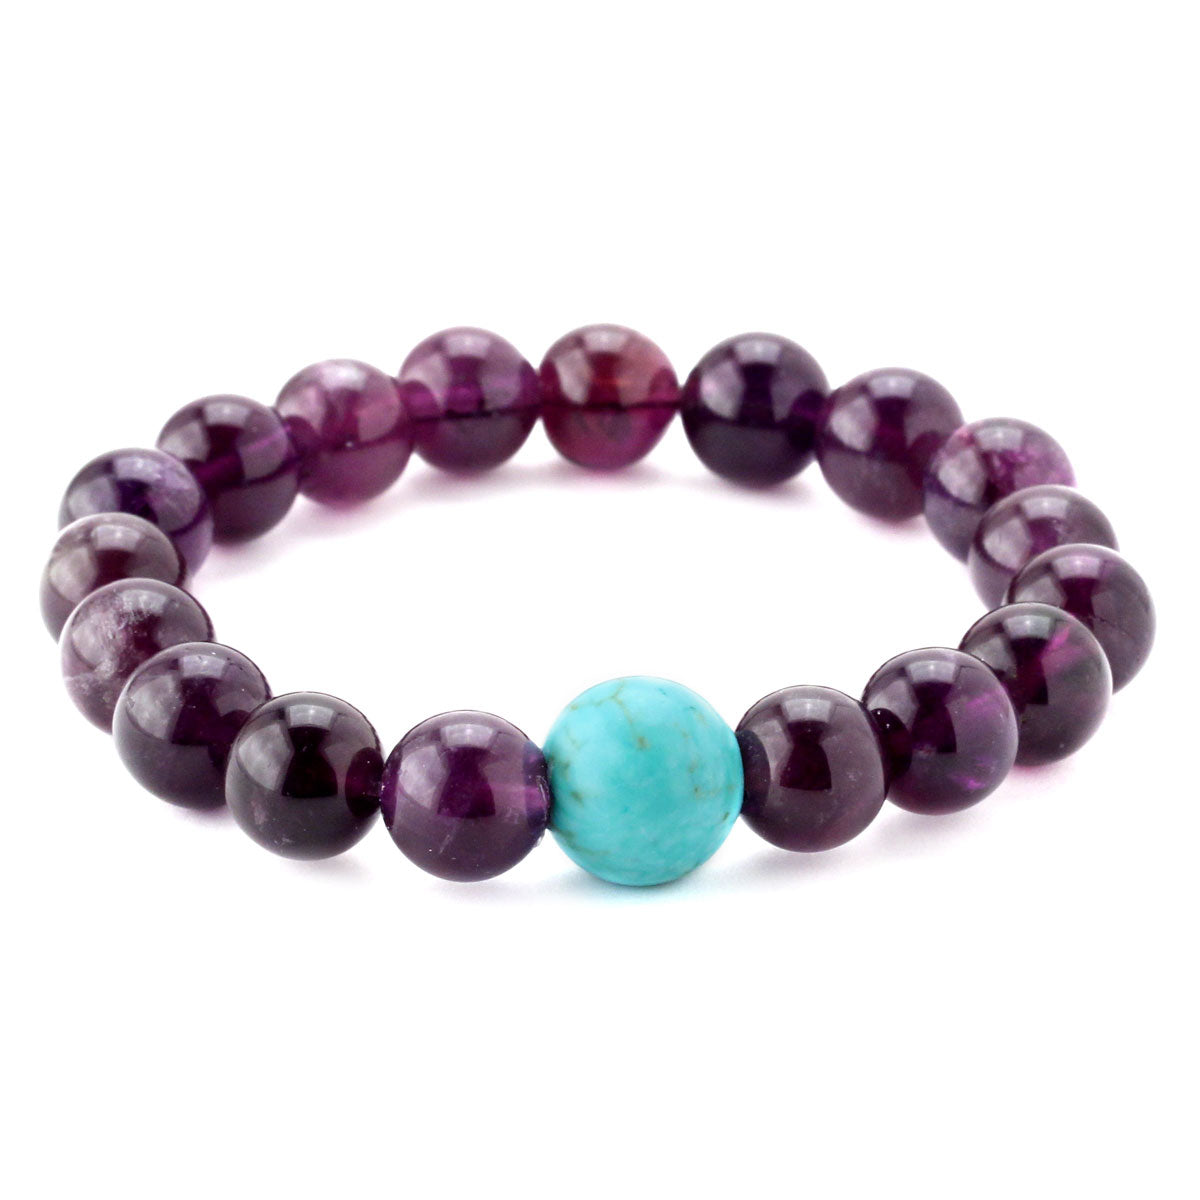 Amethyst and Turquoise Bracelet-346332